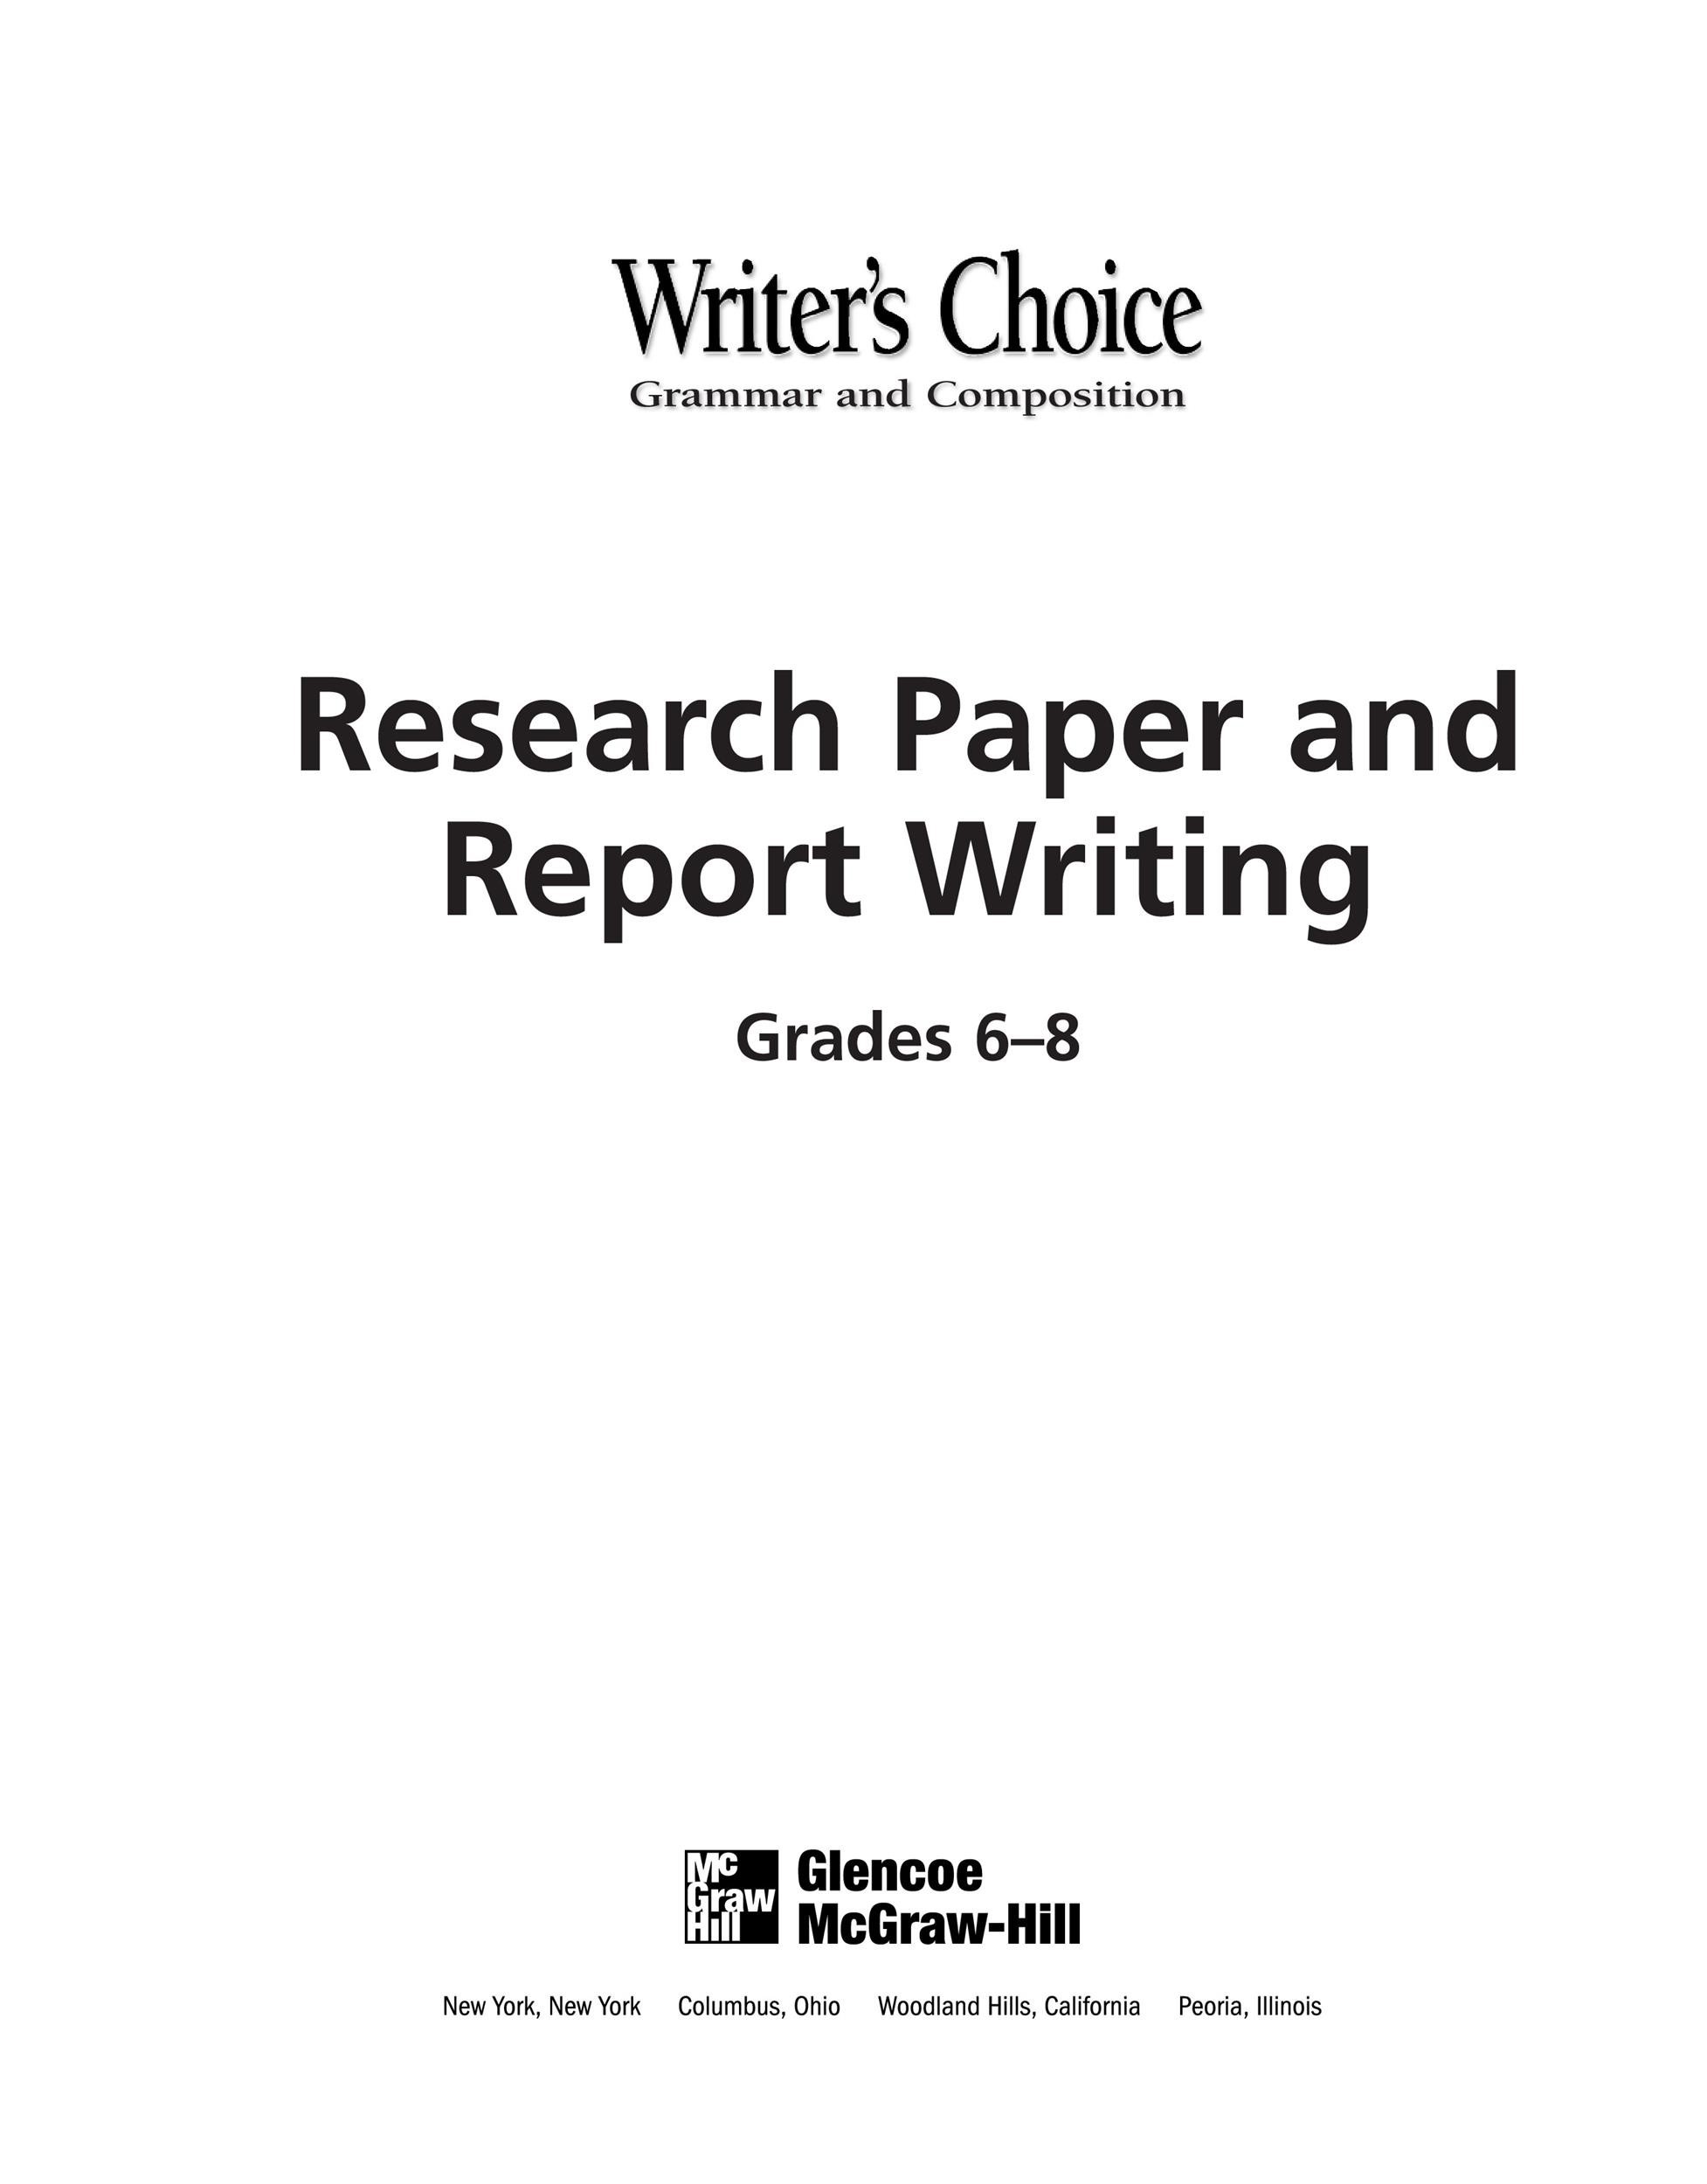 Research paper topics radiology